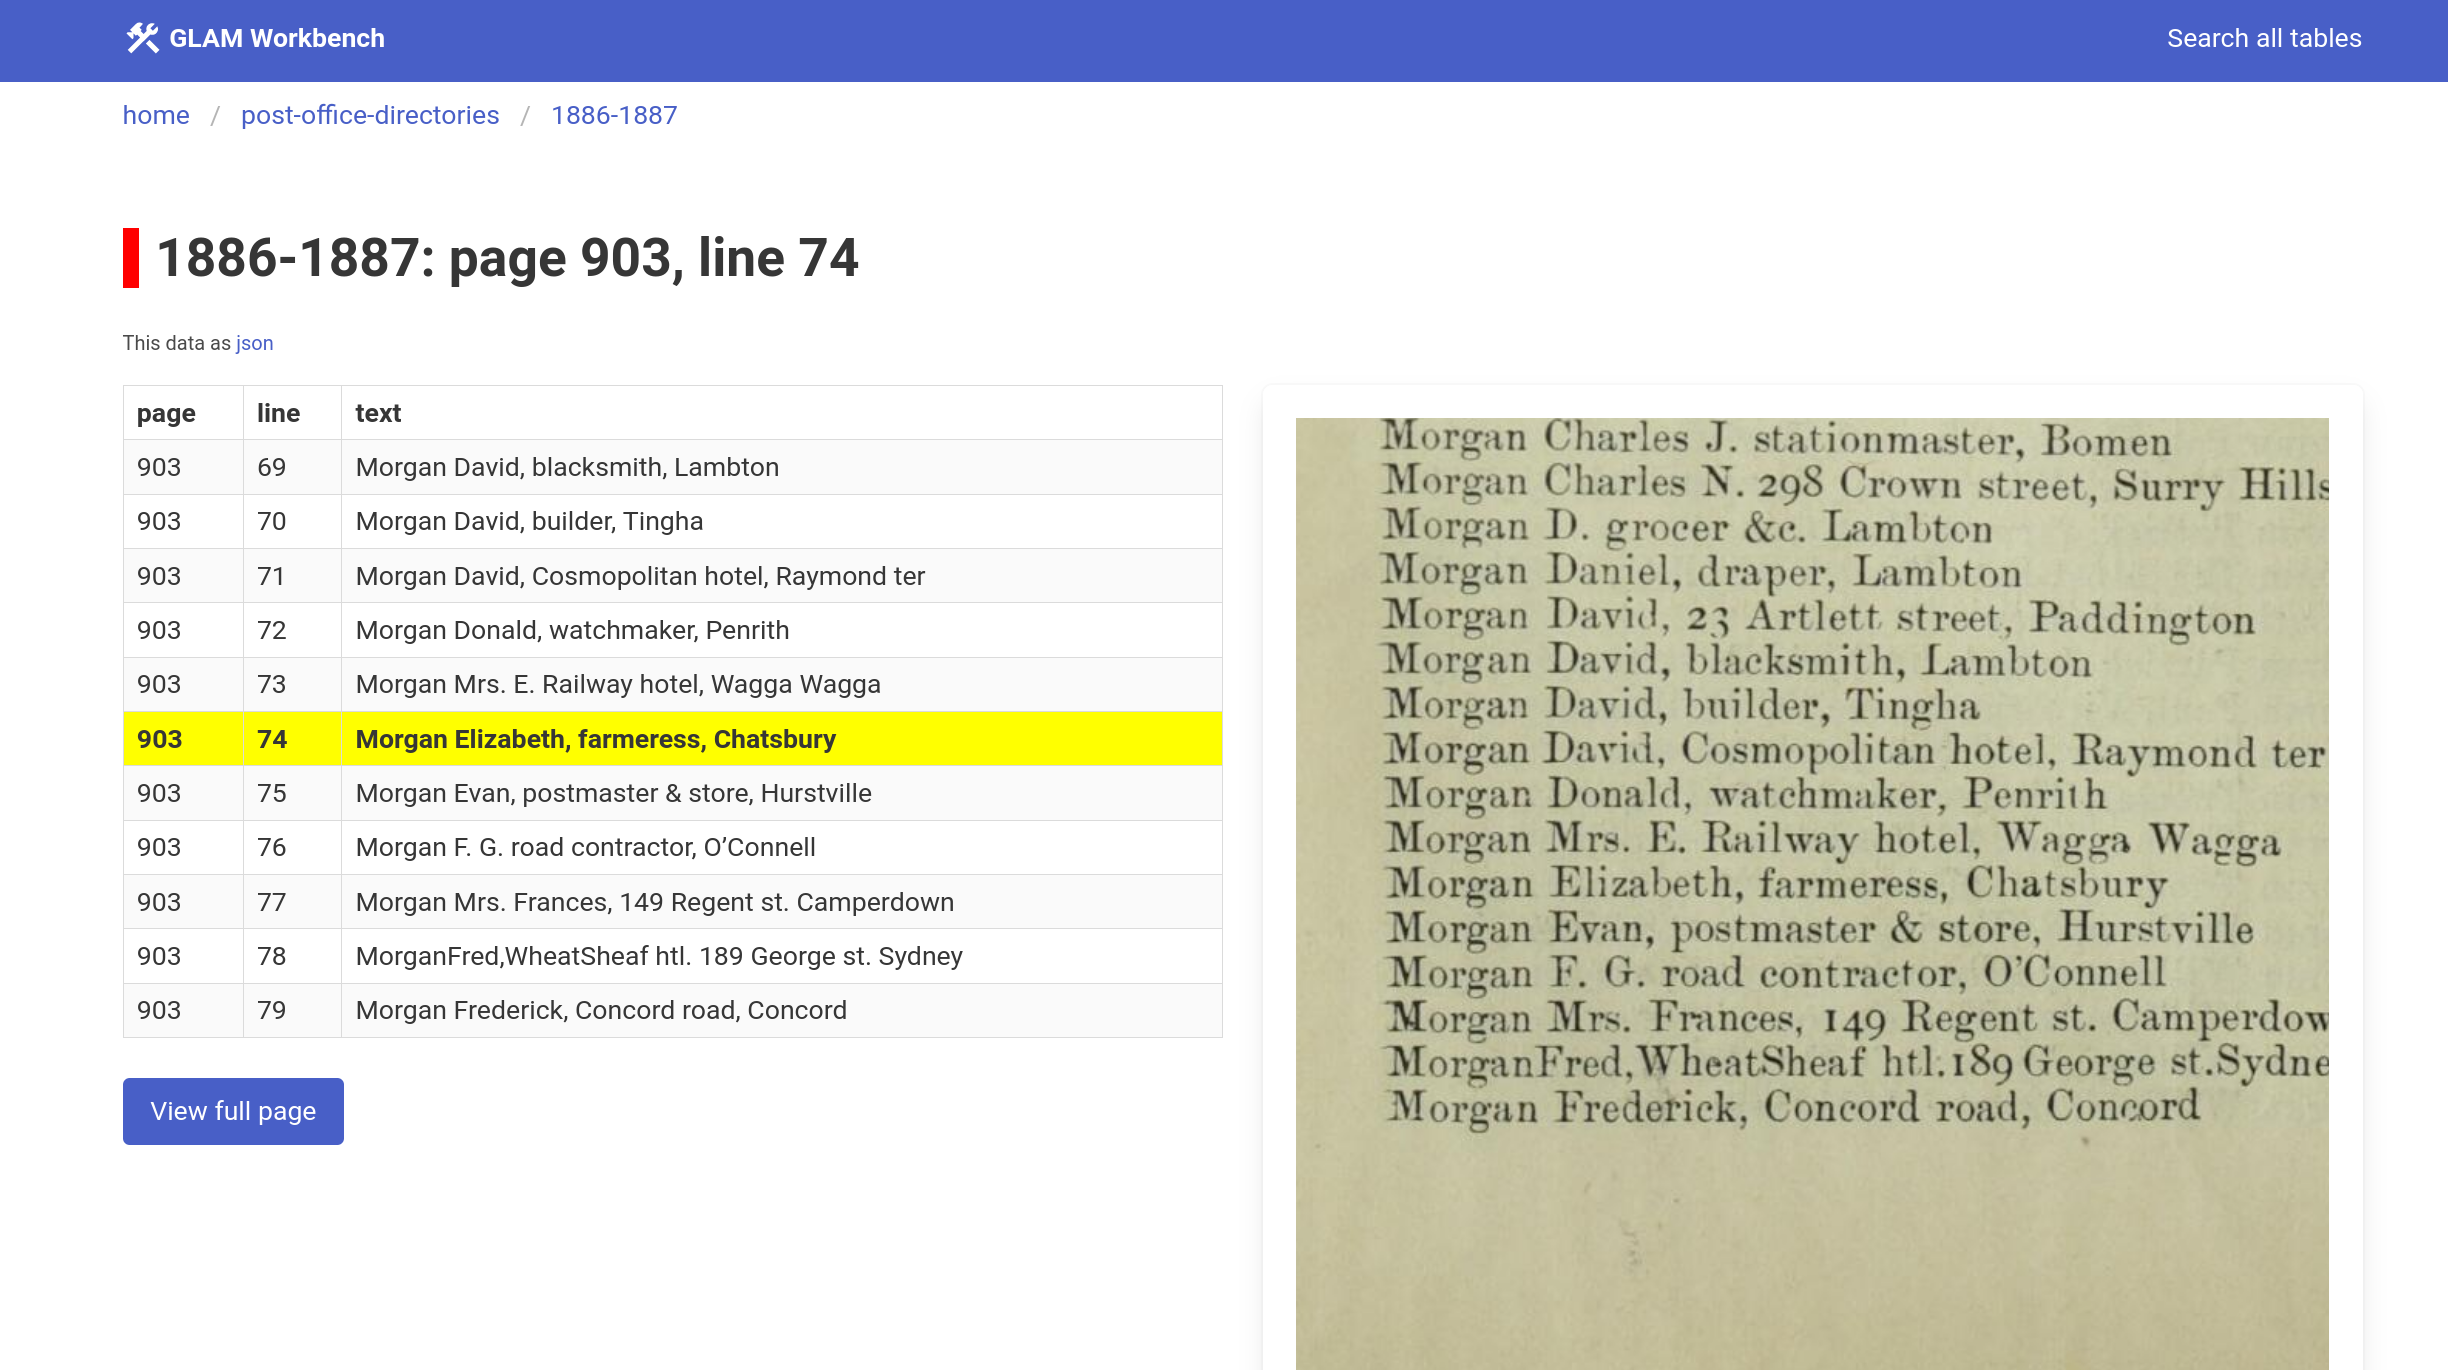 Screenshot of information about a single row in the NSW Post Office Directories. The row is highlighted in yellow, and displayed in context with five rows above and below. There’s a button to view the full page, and box displaying a zoomable image of the page from Trove.